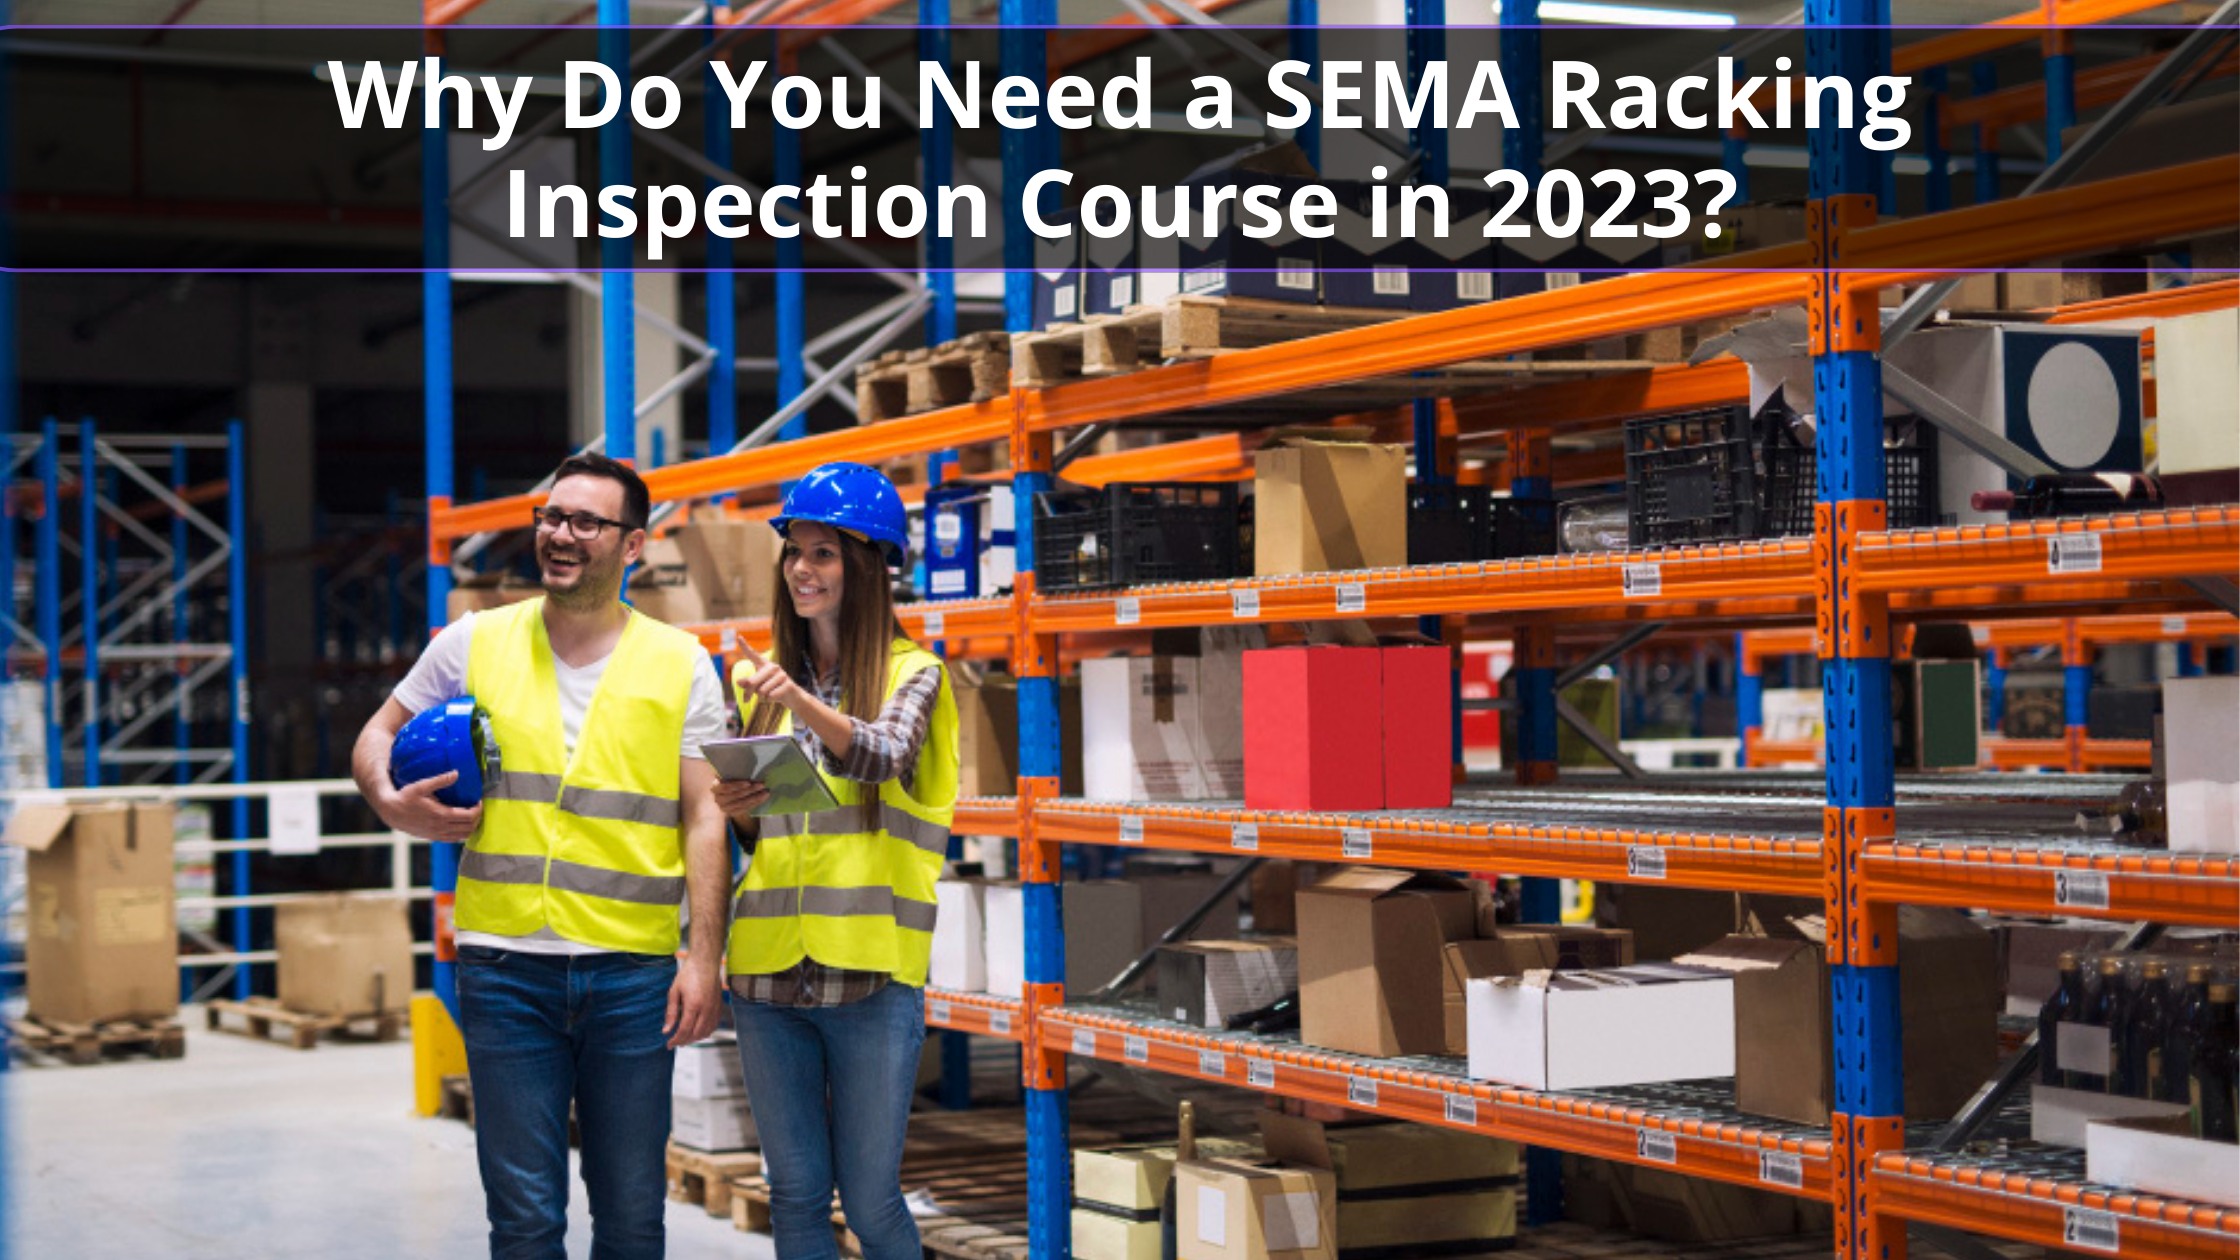 Why Do You Need a SEMA Racking Inspection Course in 2023?